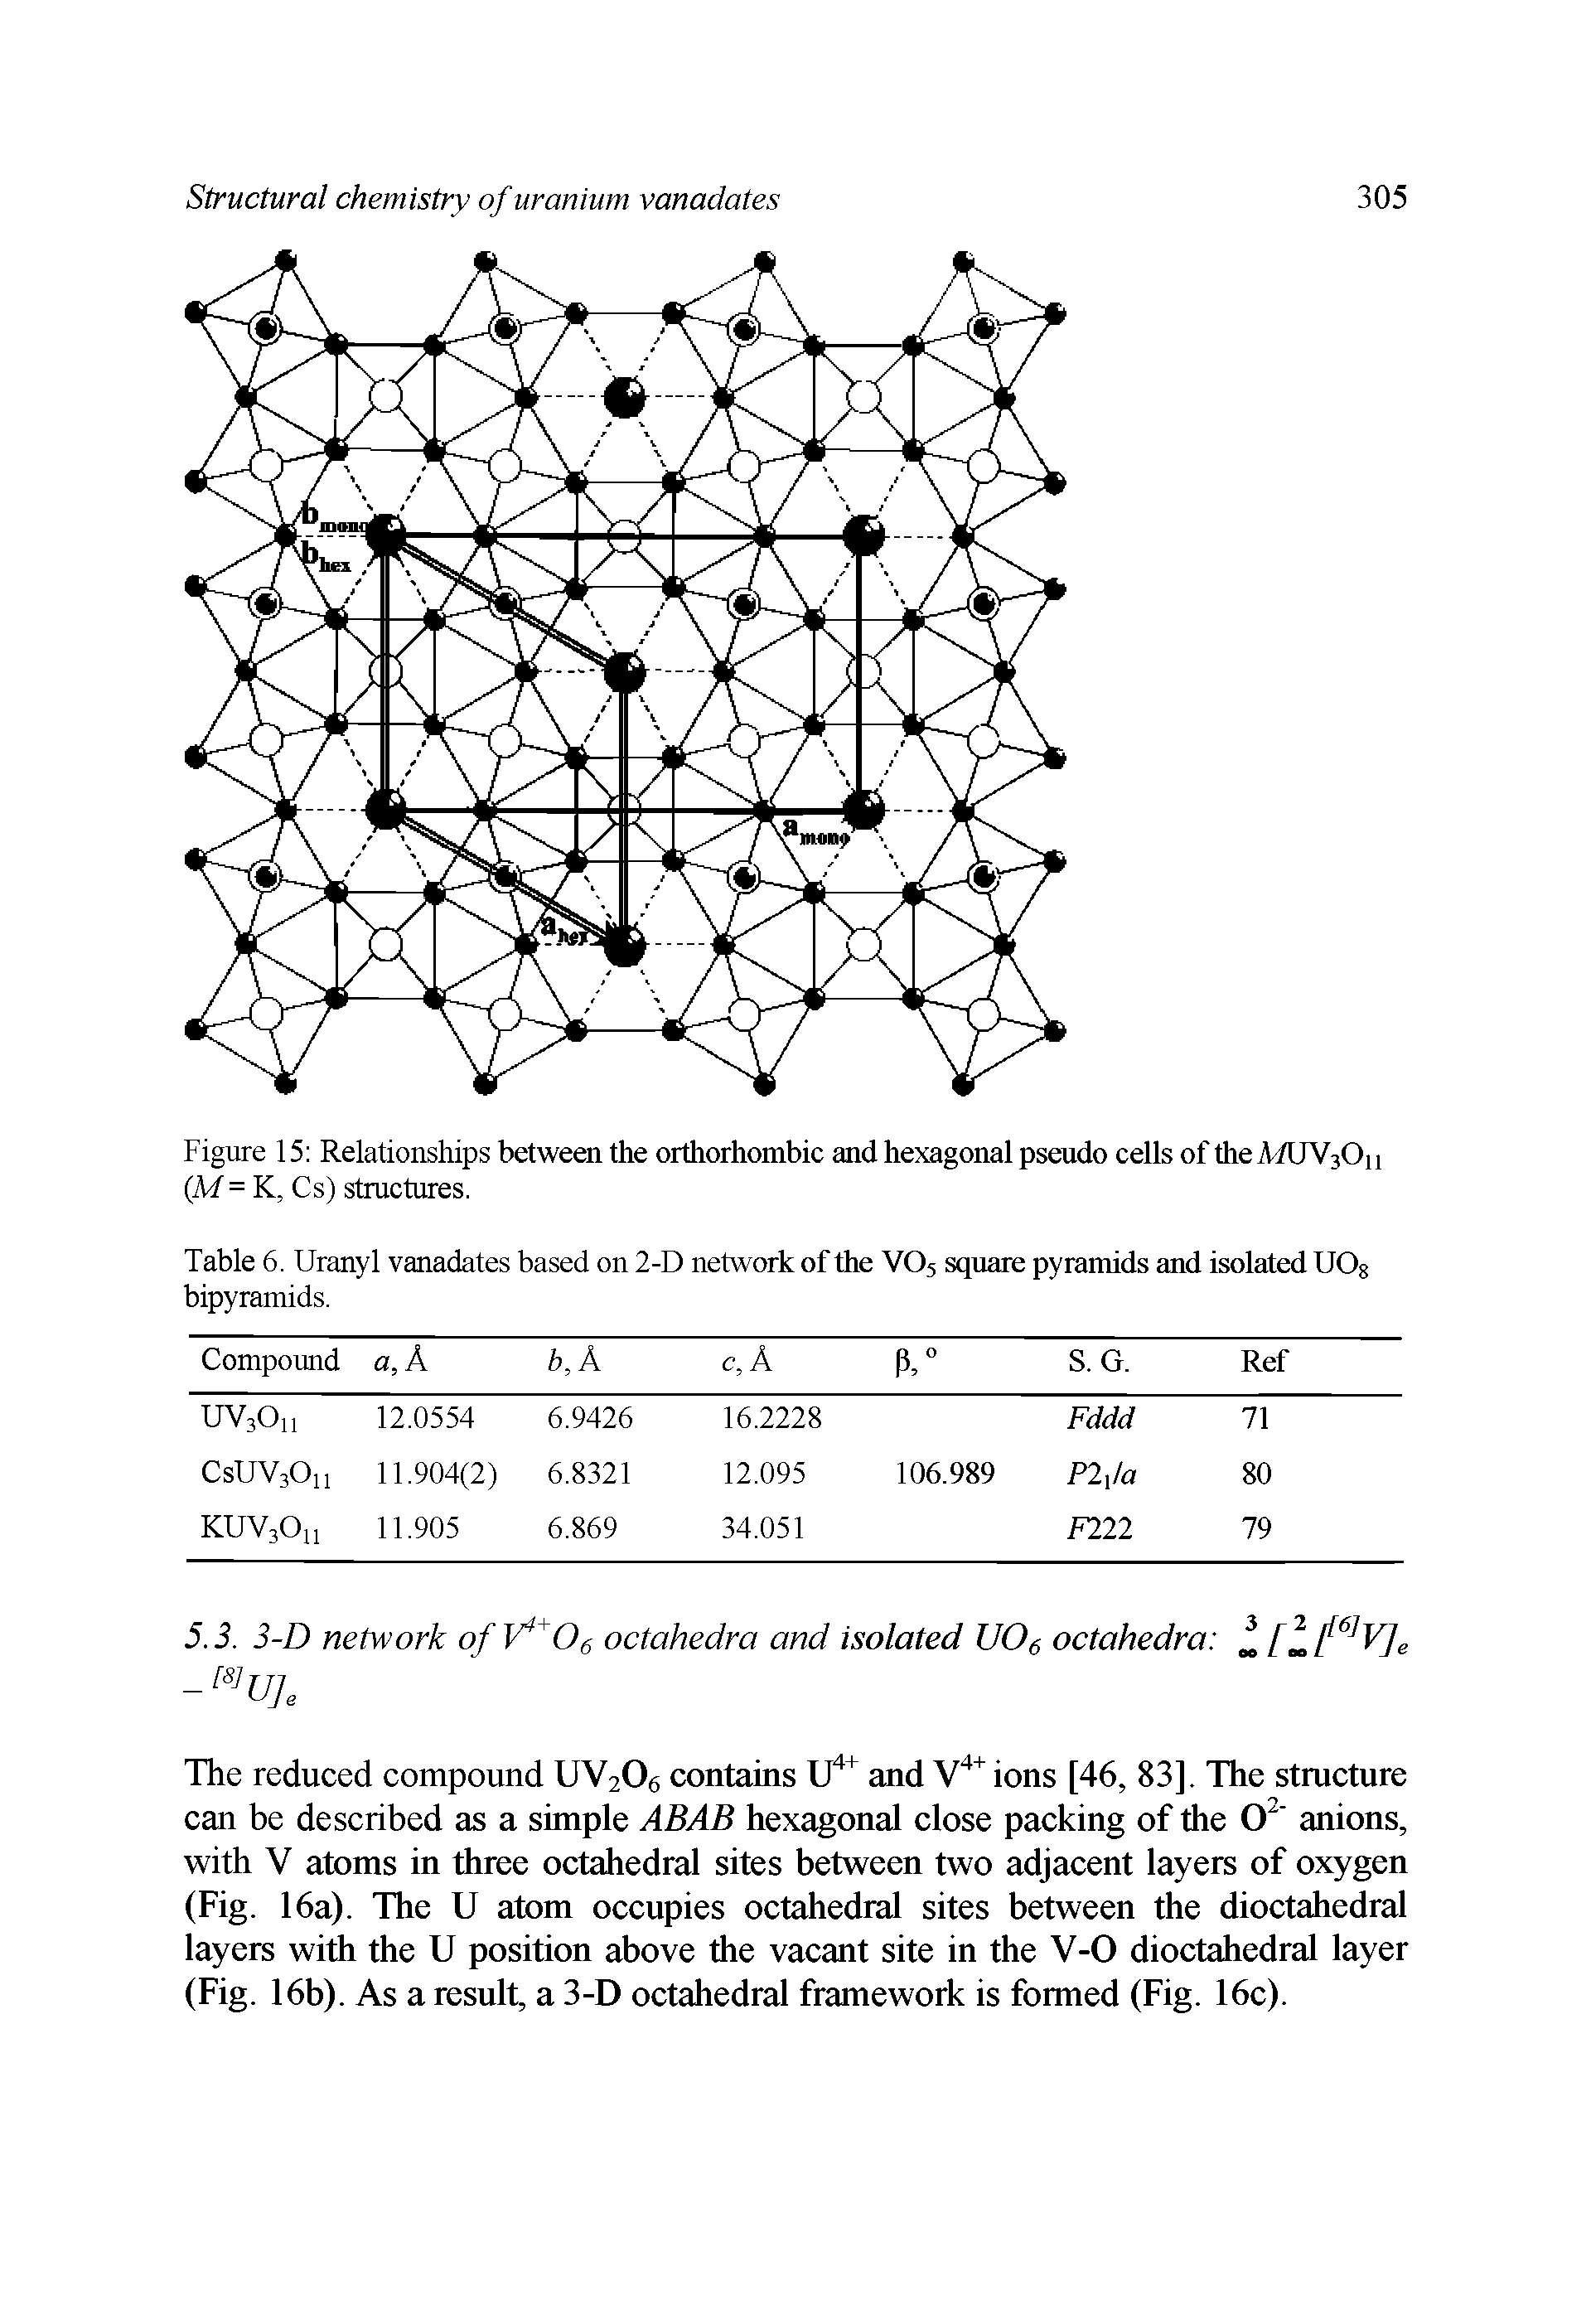 Table 6. Uranyl vanadates based on 2-D network of the VO5 square pyramids and isolated UOg bipyramids.